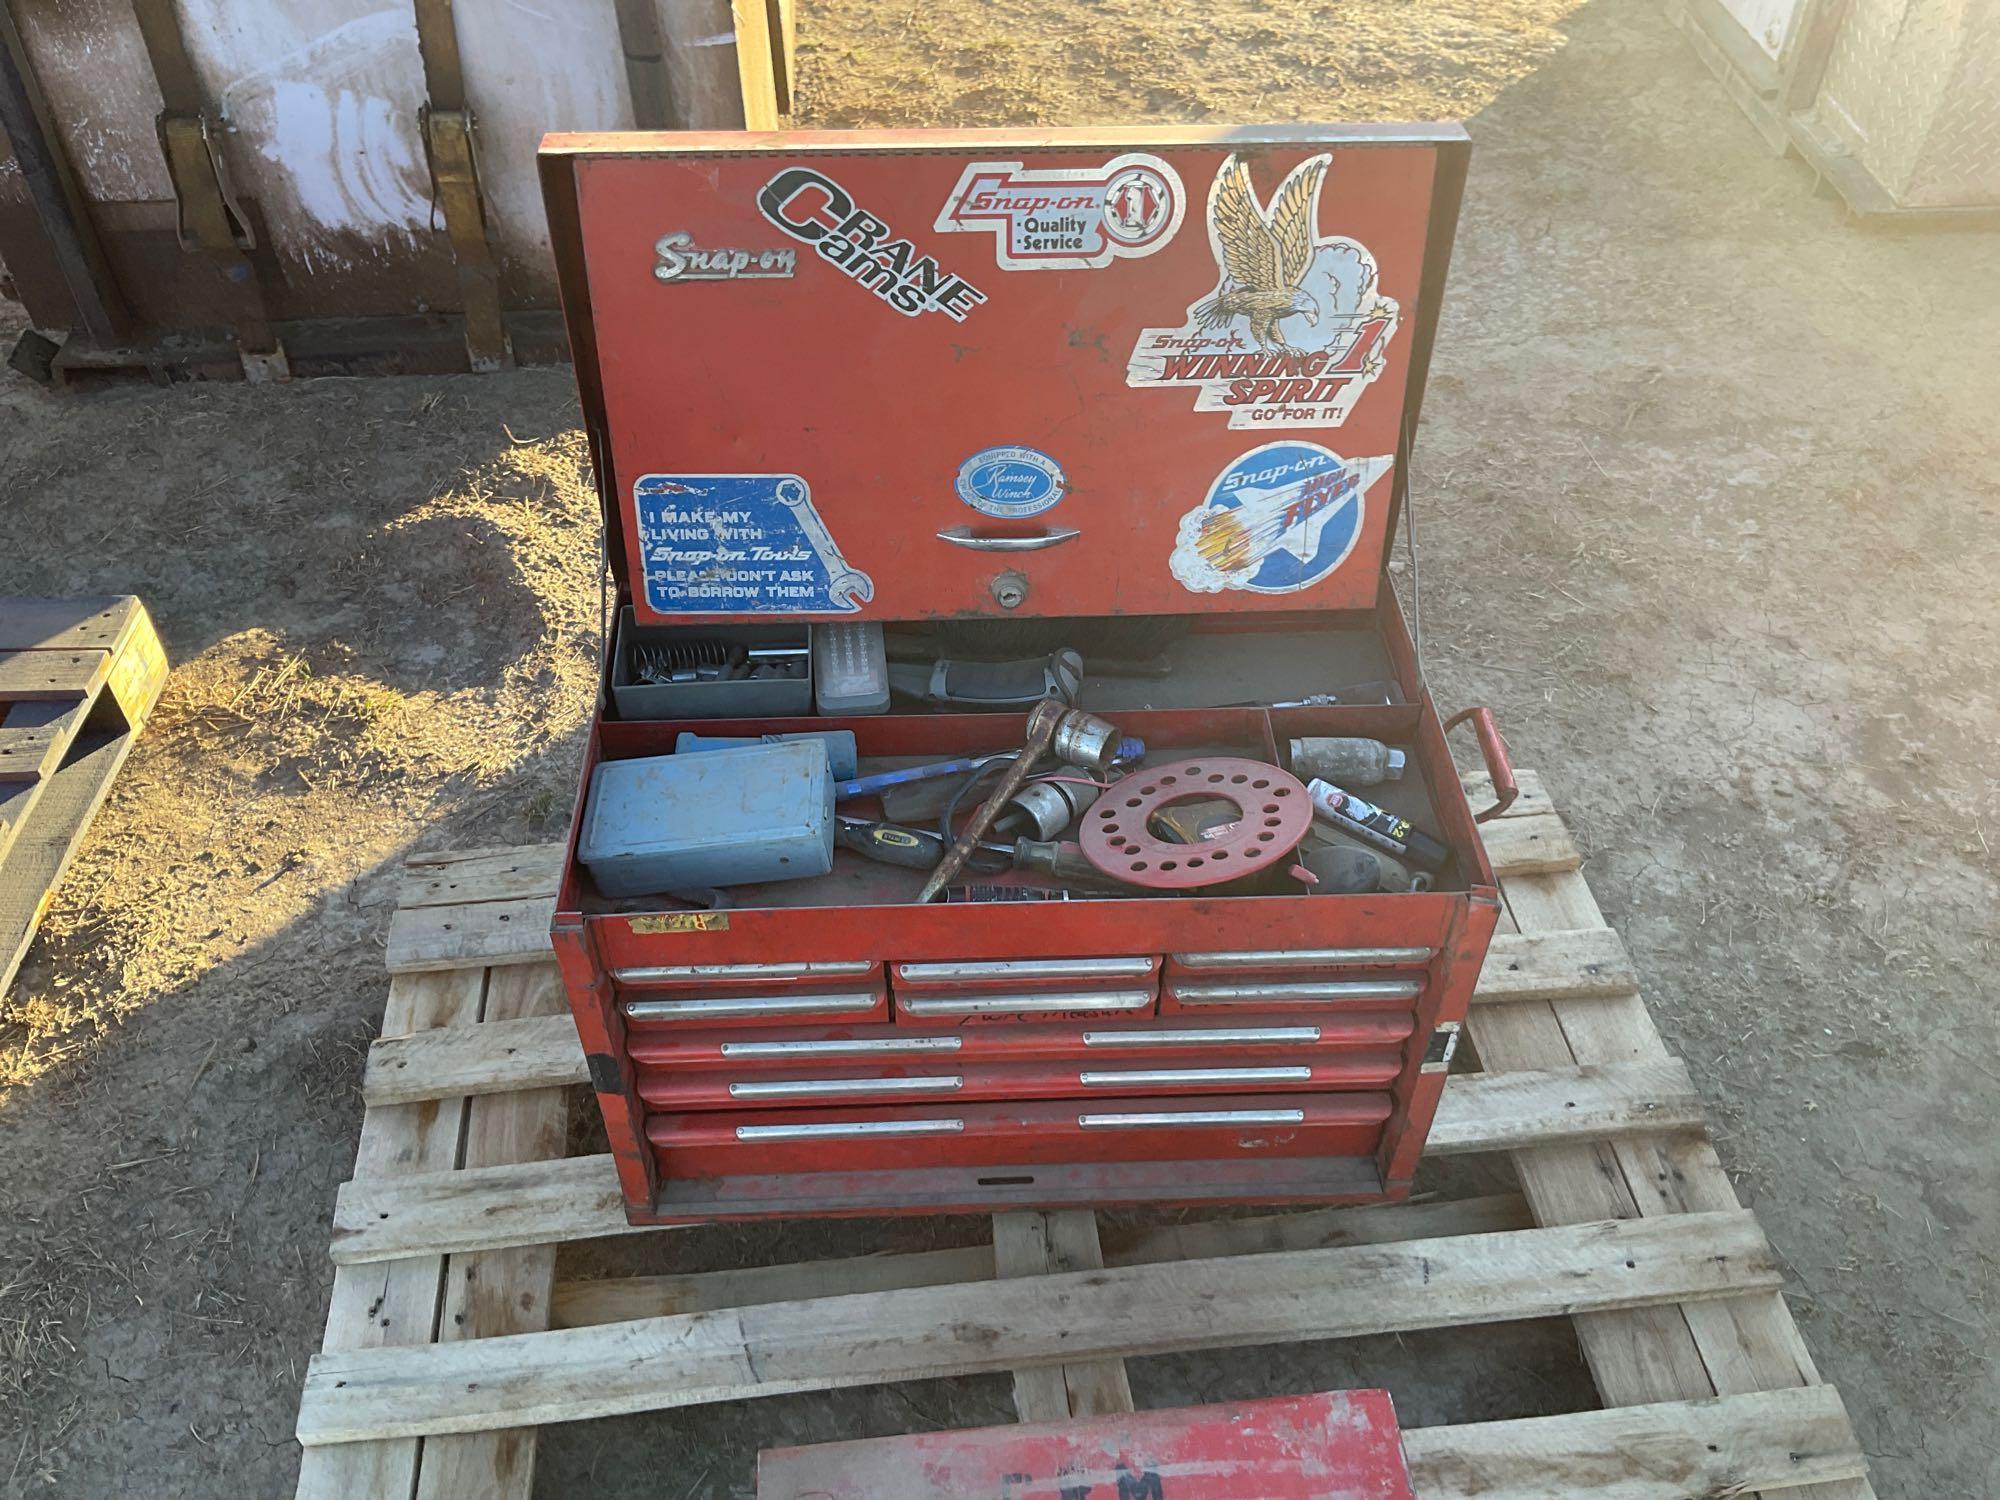 Snap On Tool boxes and tools